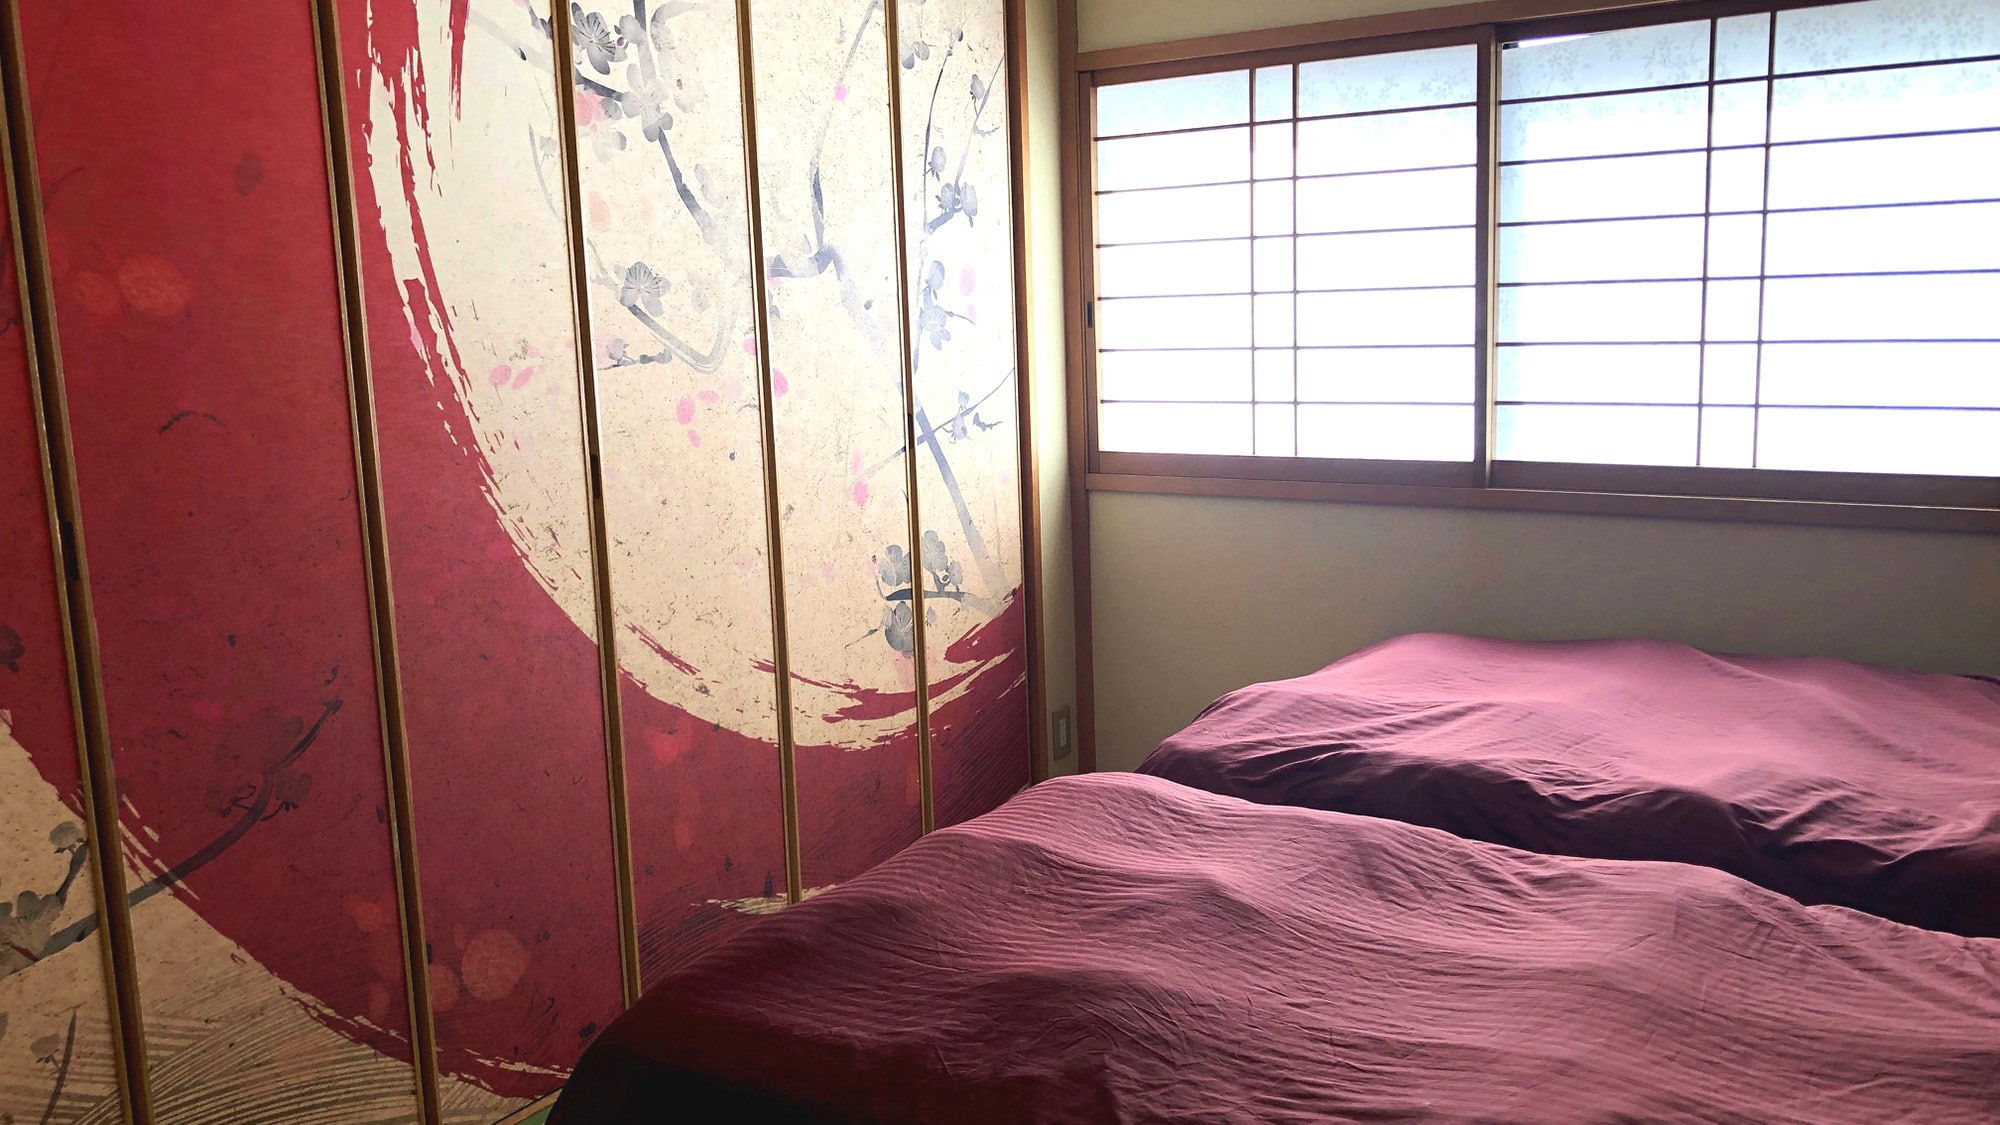 ・ Pure Japanese style room: 2 single beds installed